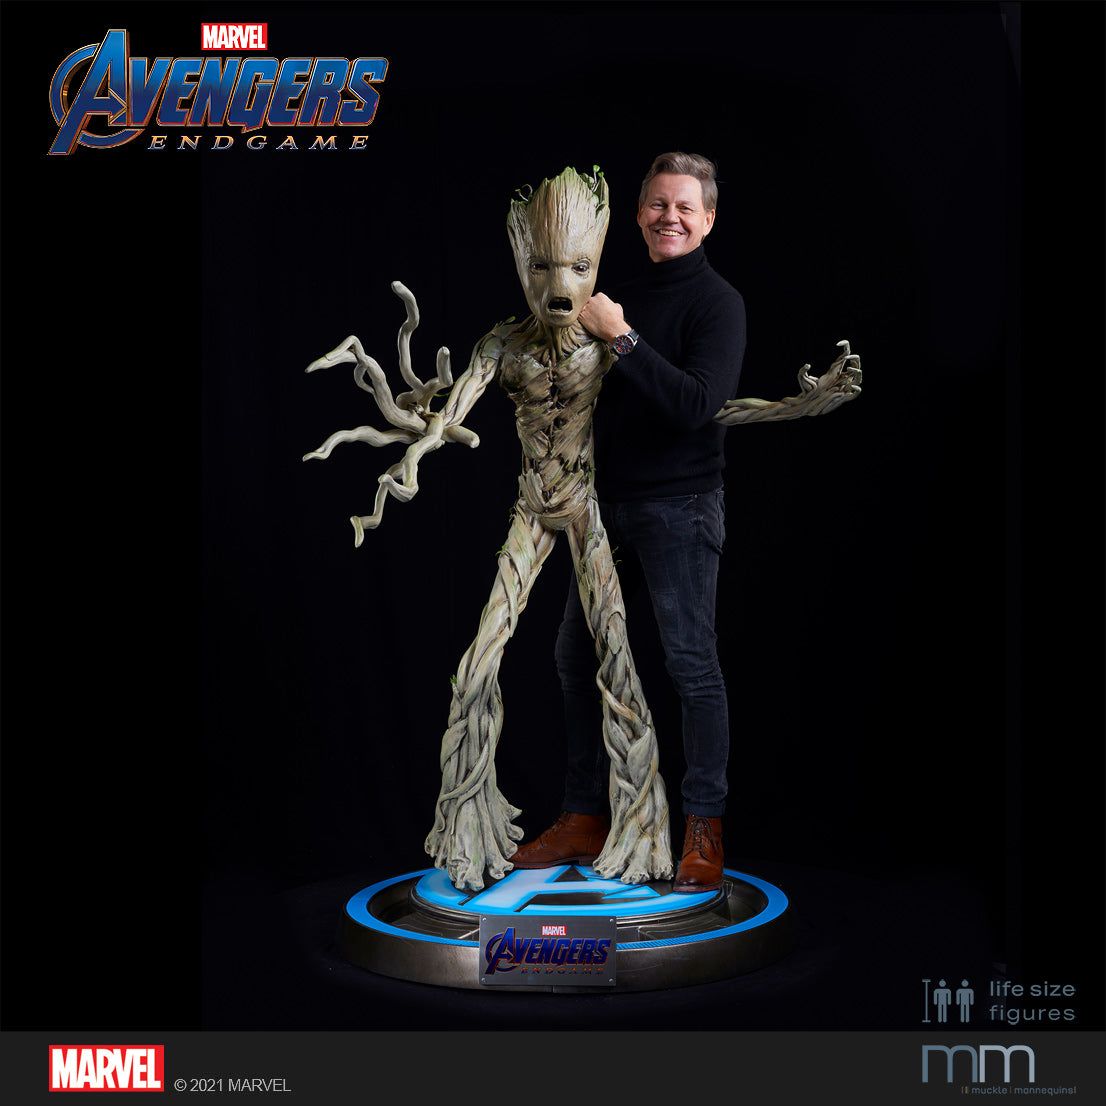 GROOT TEENAGE life-size figure - realistic figure from Avengers Endgame –  Muckle Mannequins GmbH